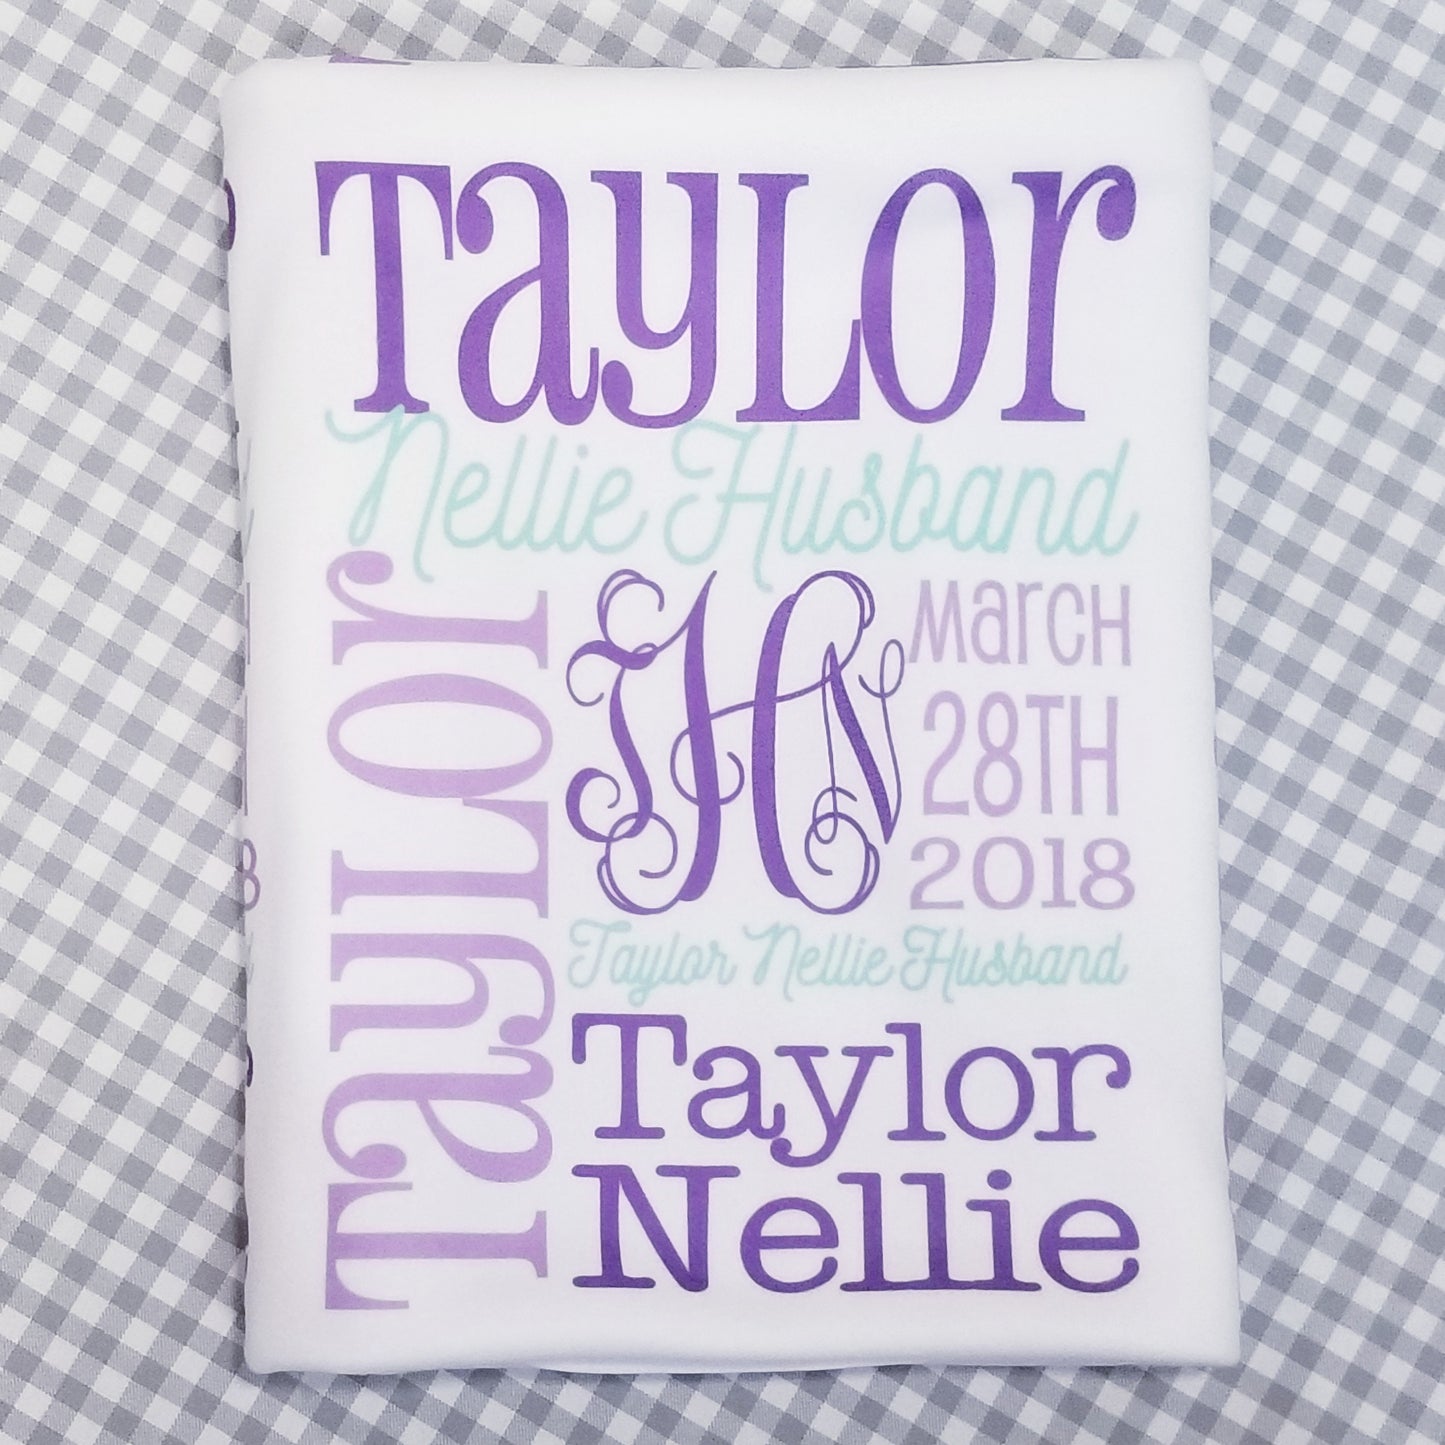 Personalized Baby Name Blanket - Classic Design with Birth Stats